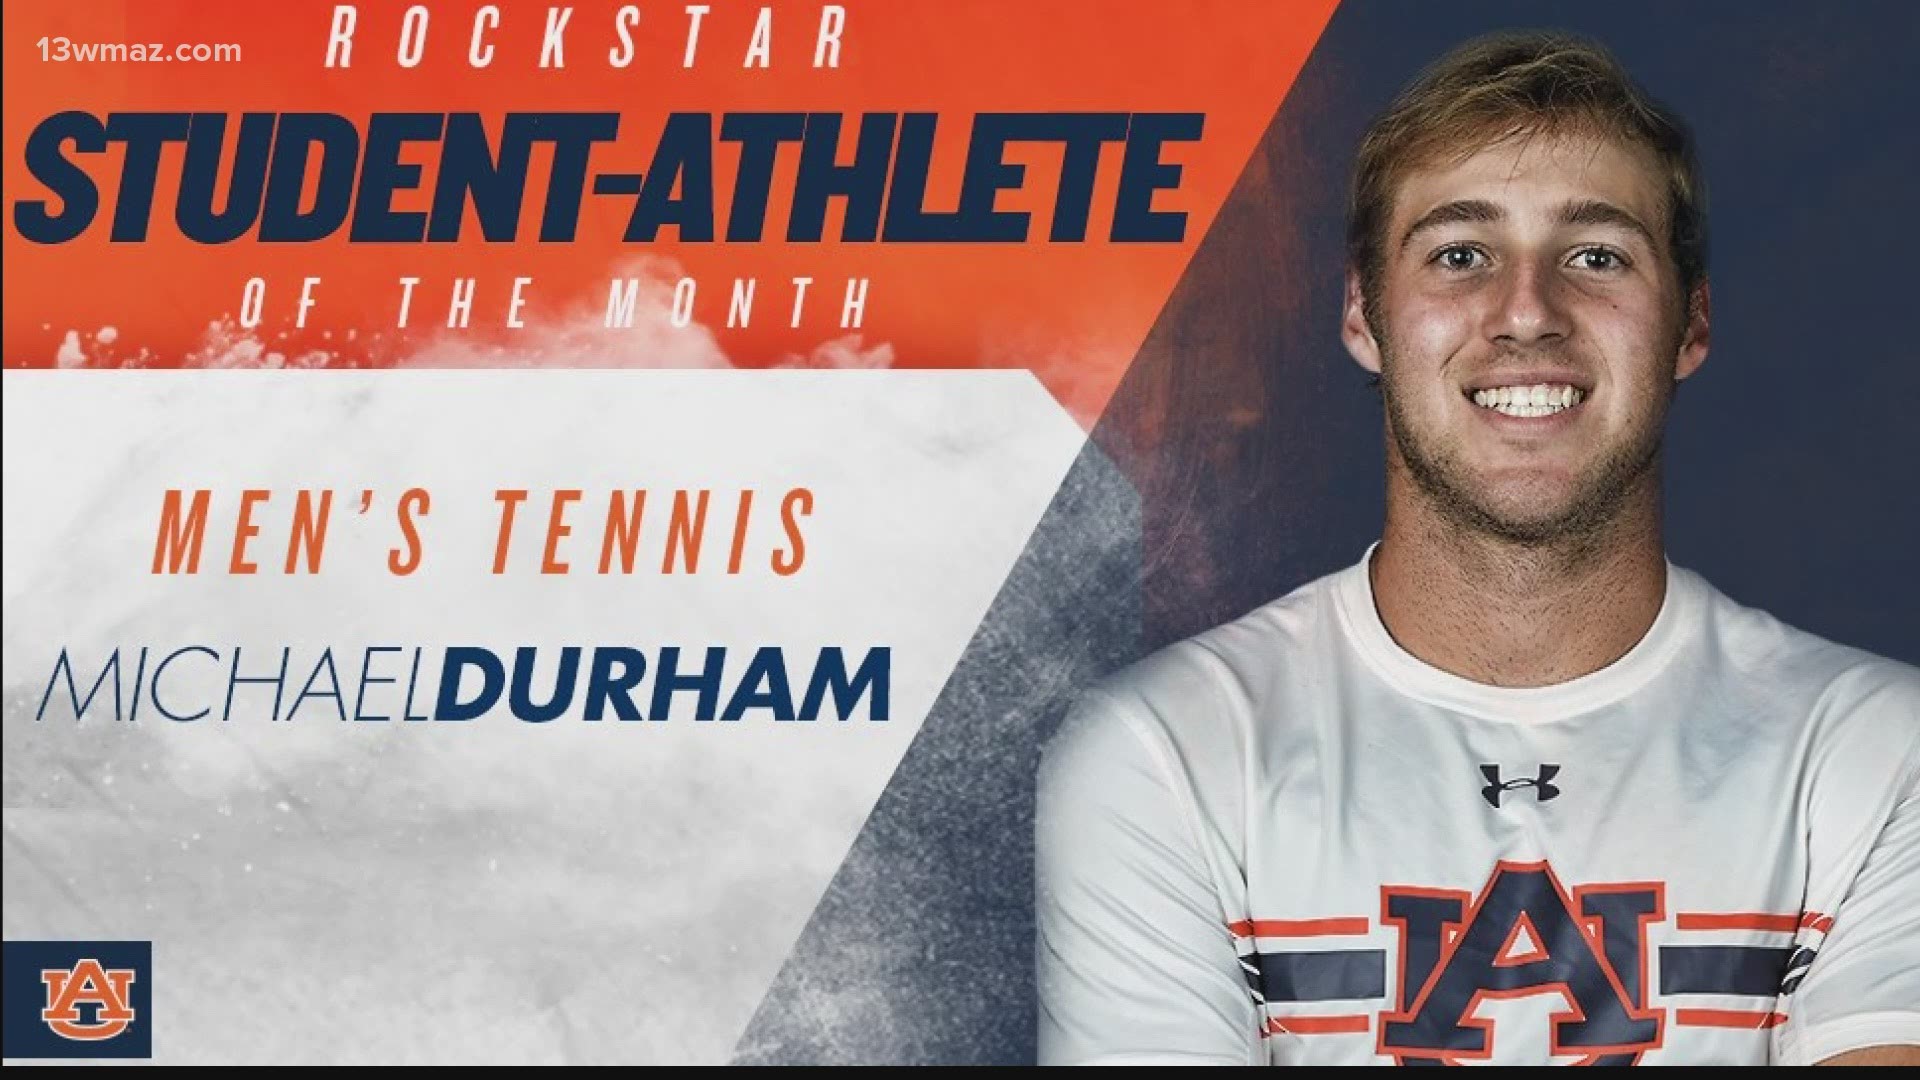 Head men's tennis coach Eric Hayes has announced the addition of Michael Durham to the 2021 roster. Durham returns home to Macon to finish up his playing career